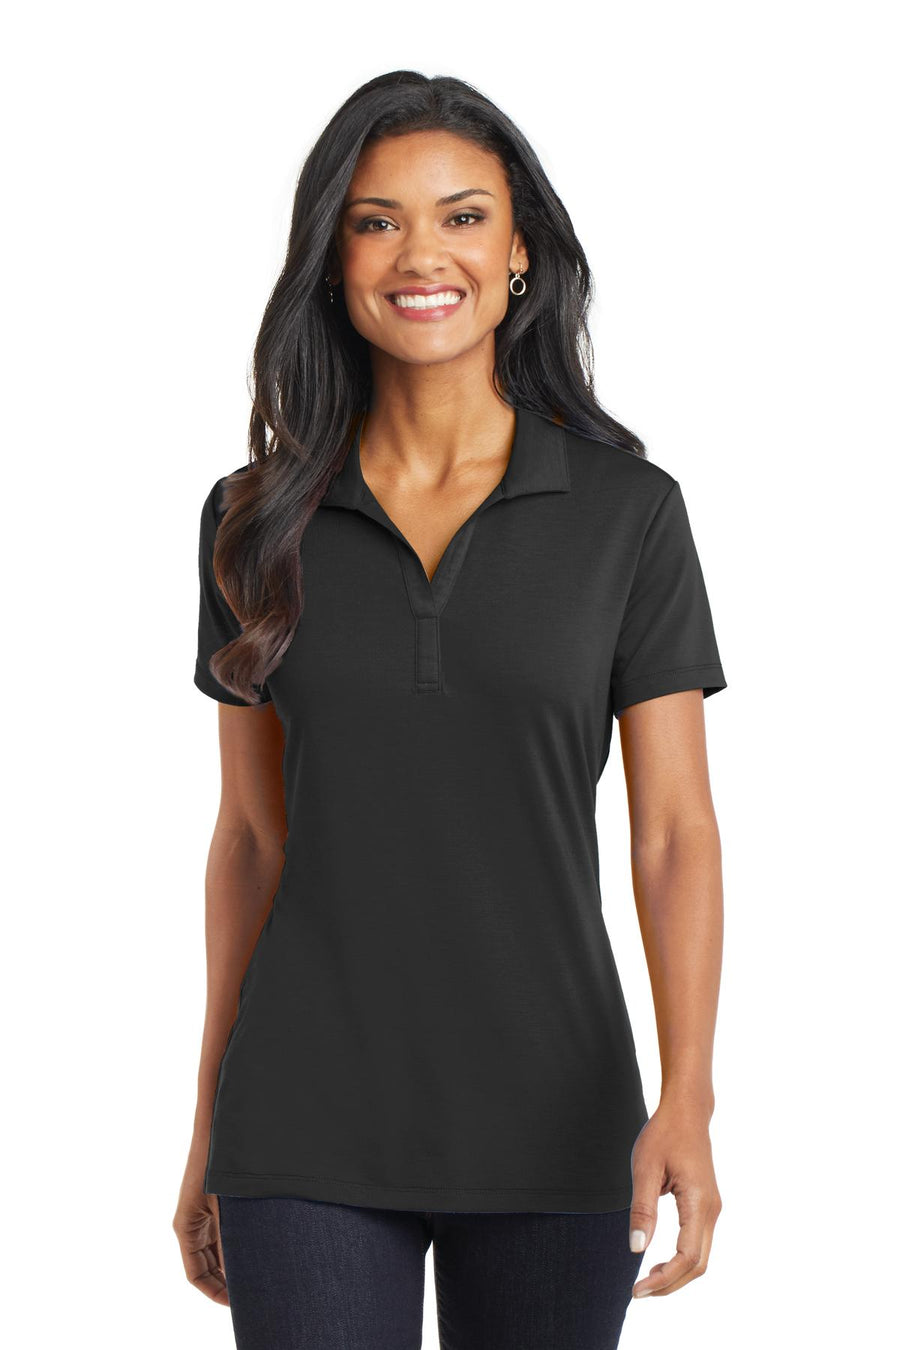 Port Authority Cotton Touch Performance Polo.